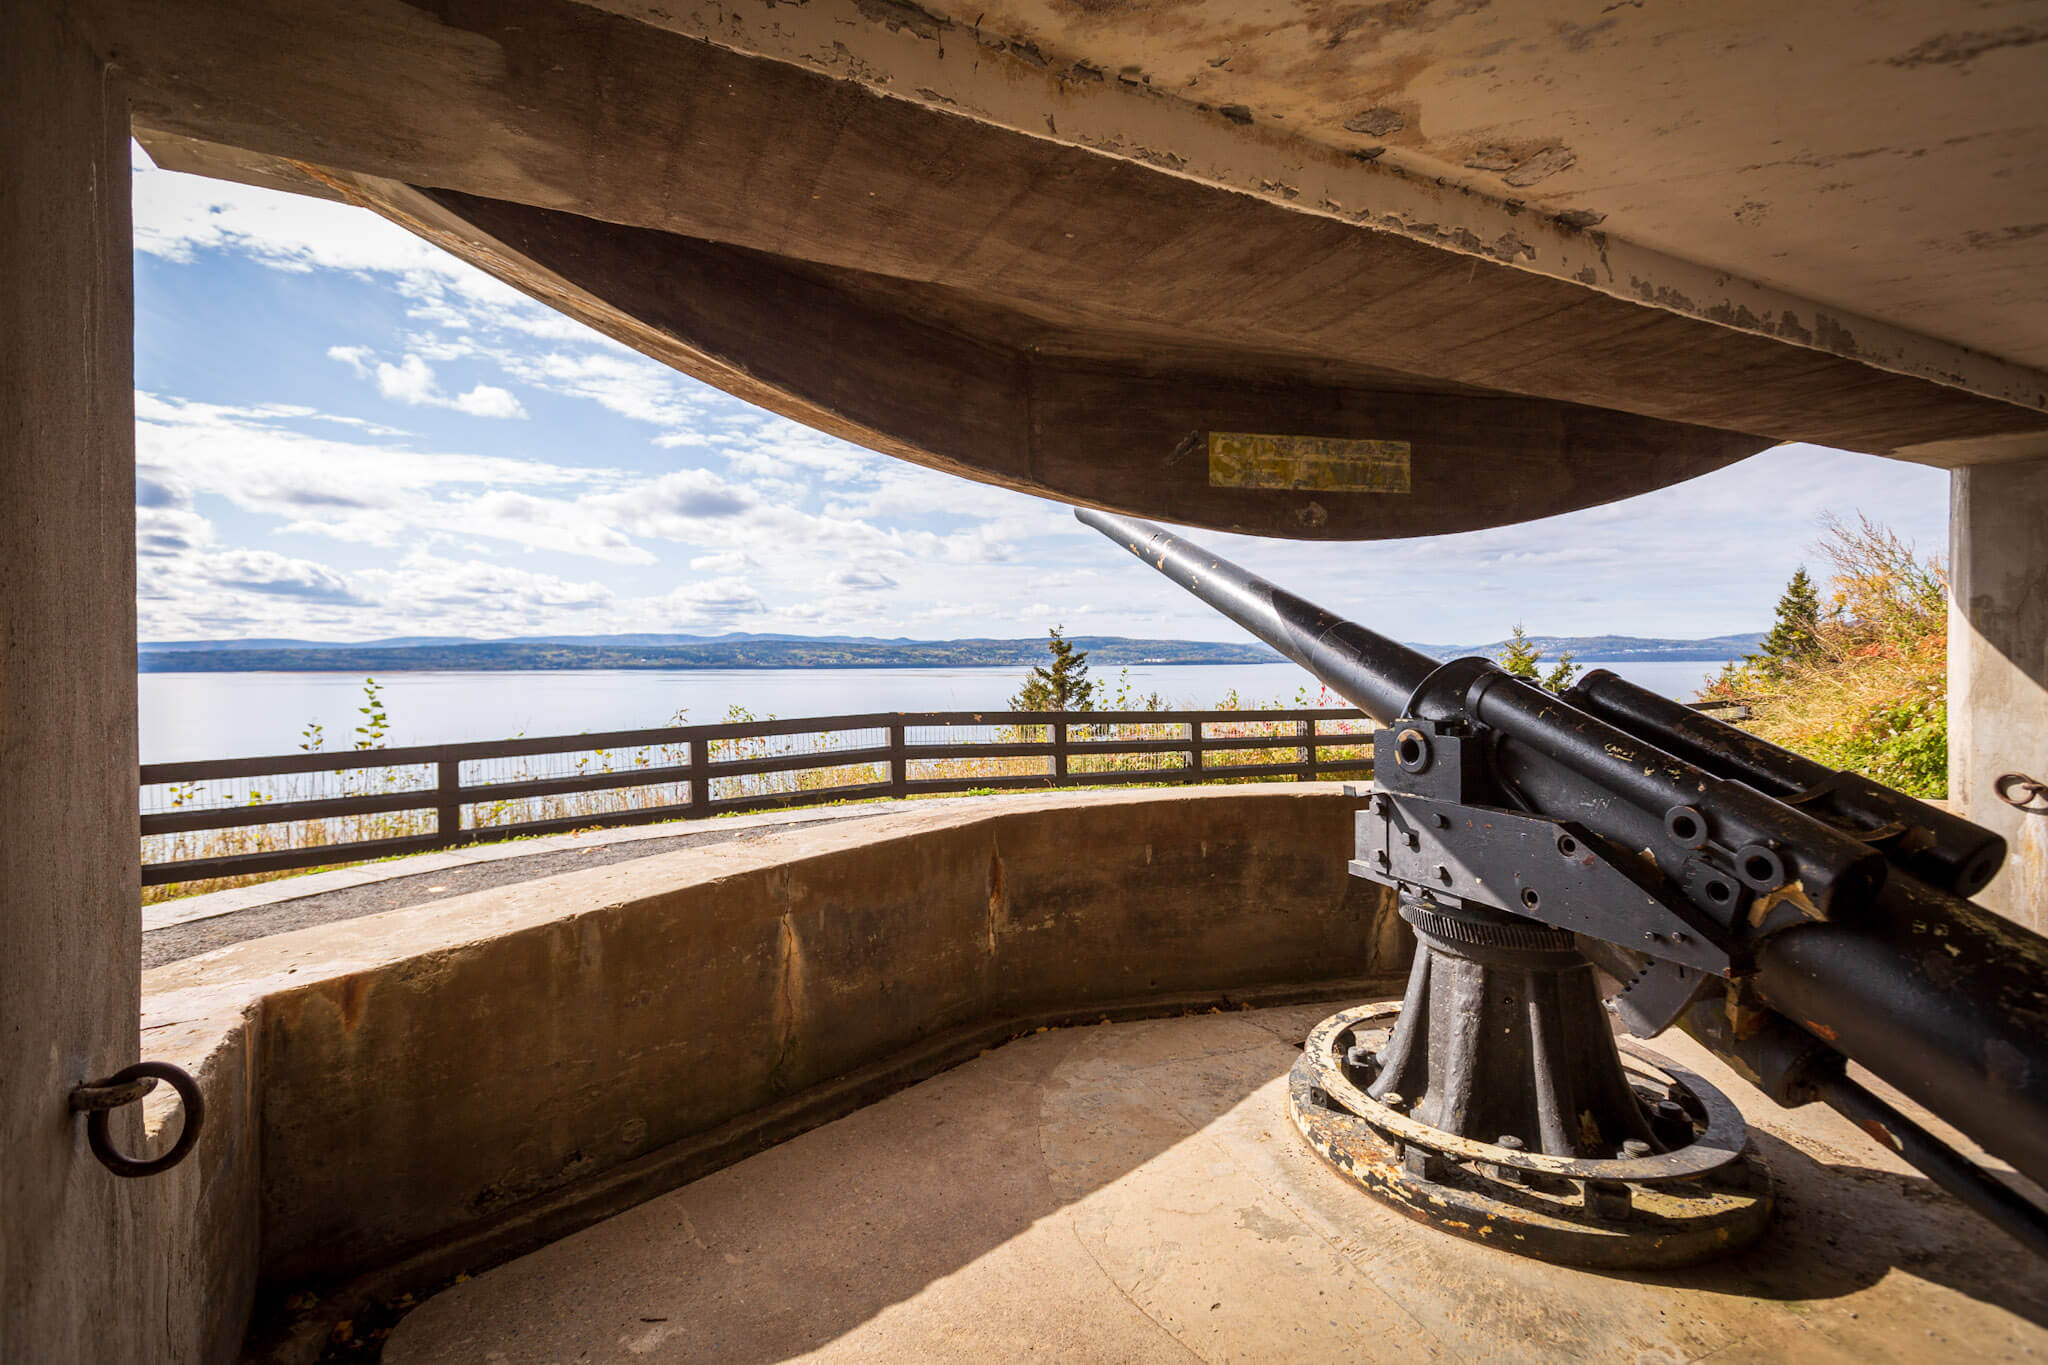 One of two coast defence guns at Fort Peninsula that protected Gaspé Bay during World War II